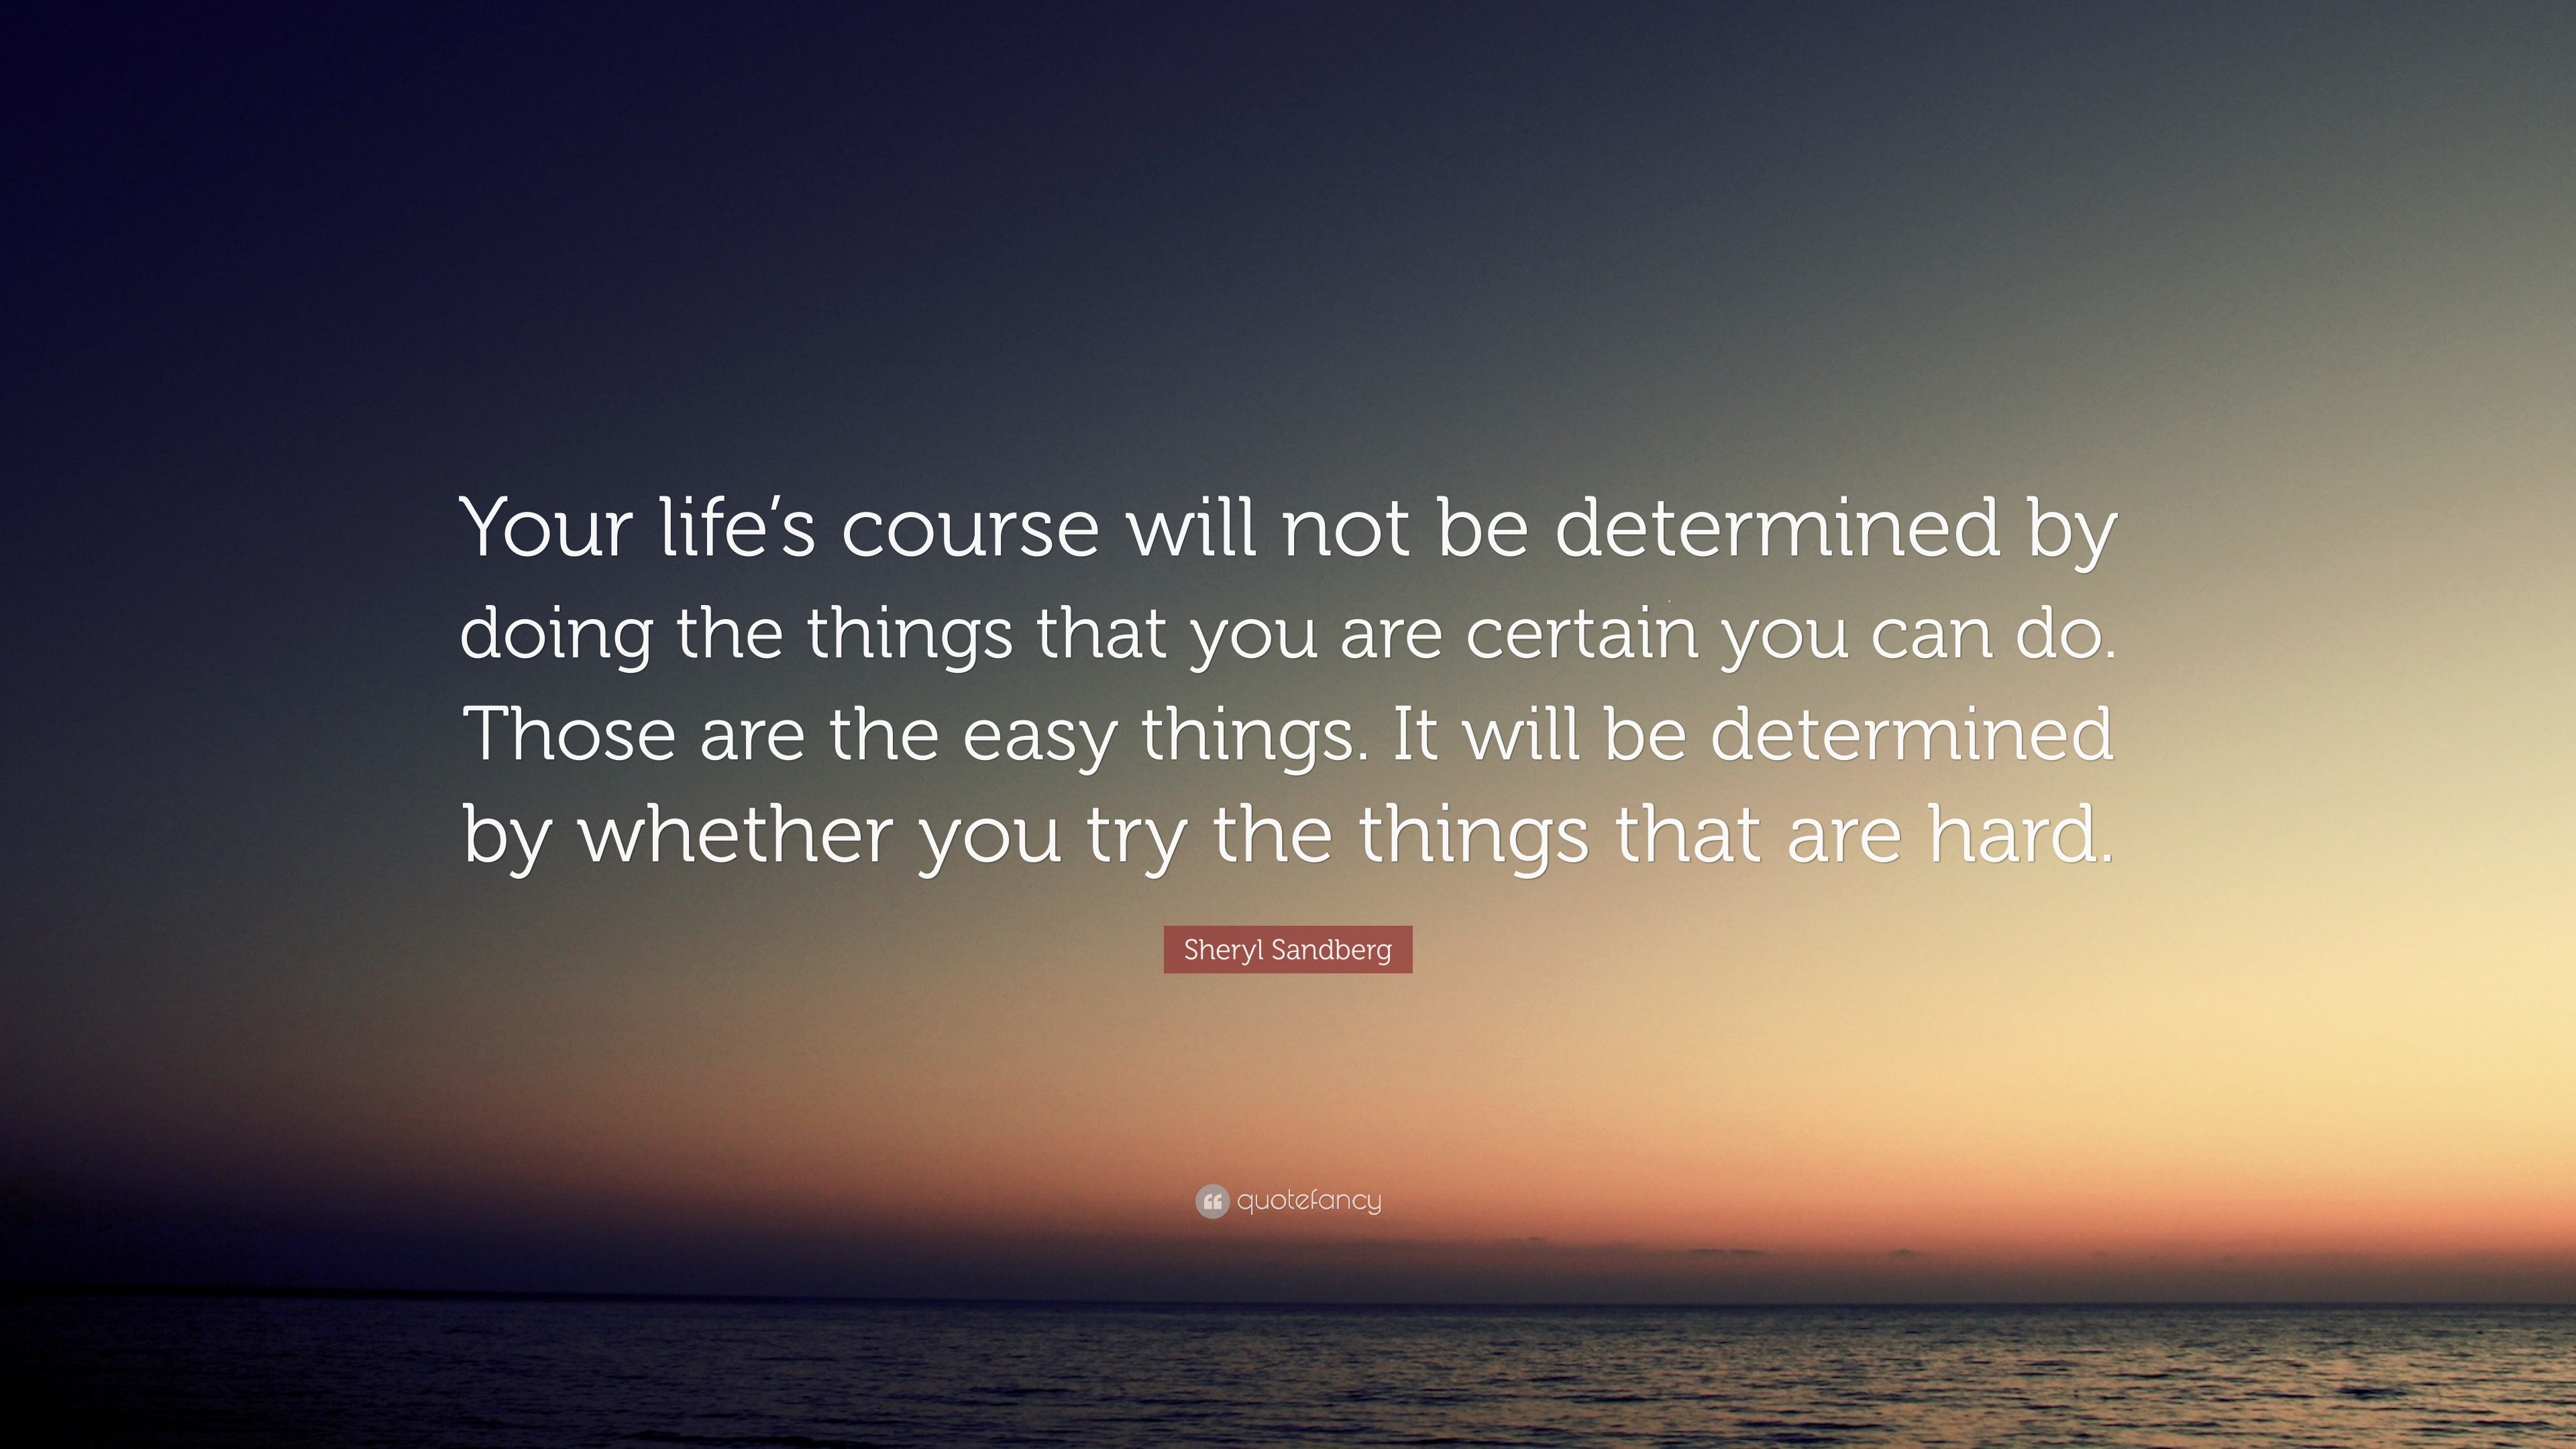 Sheryl Sandberg Quote: “Your life’s course will not be determined by